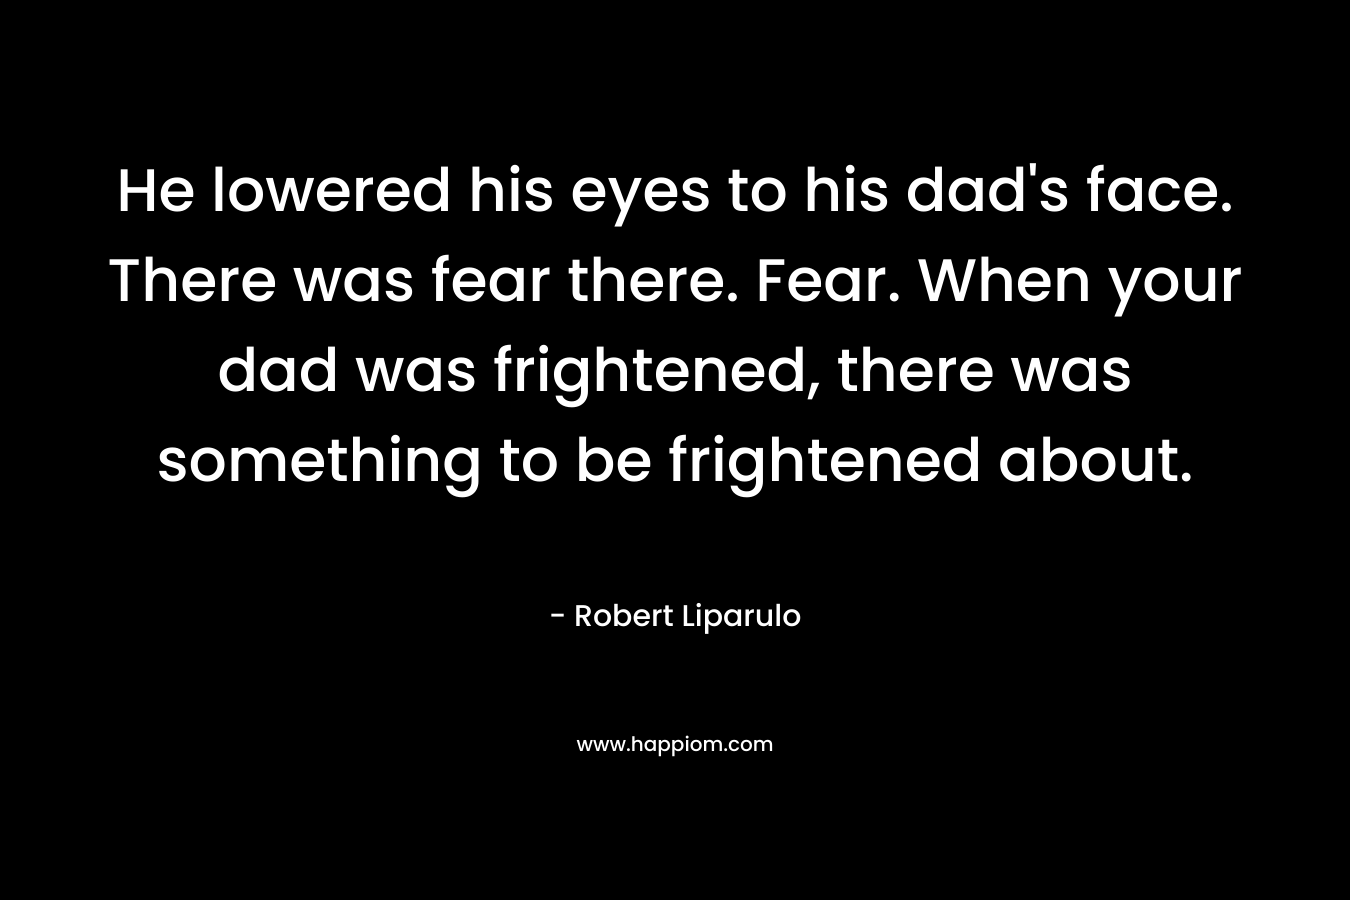 He lowered his eyes to his dad’s face. There was fear there. Fear. When your dad was frightened, there was something to be frightened about. – Robert Liparulo